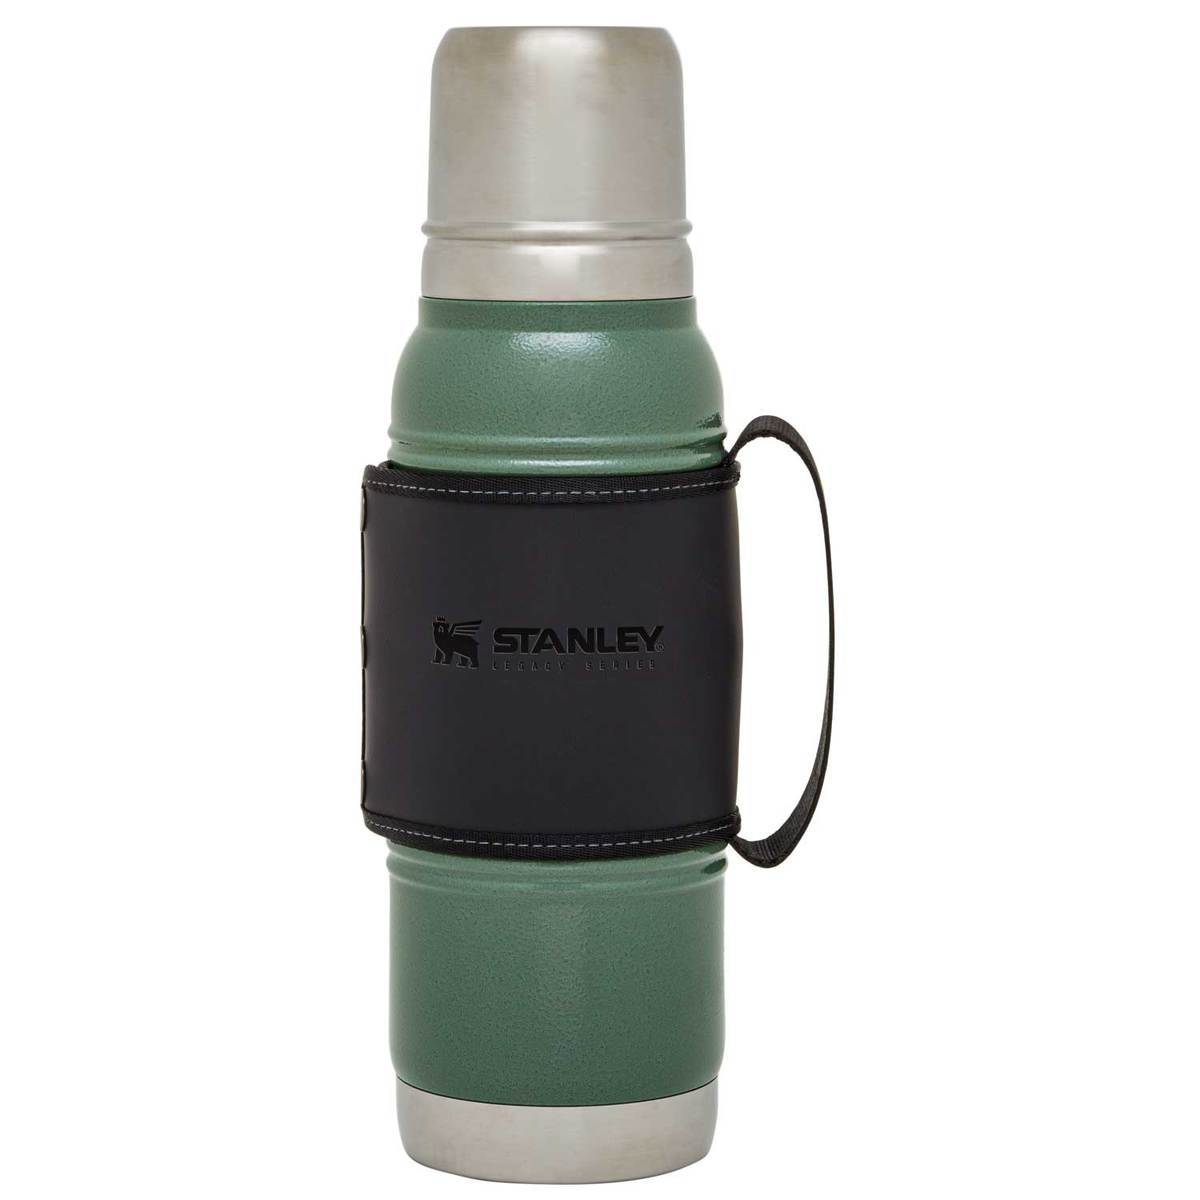 The ORIGINAL STANLEY THERMOS vintage Quart Green COOL